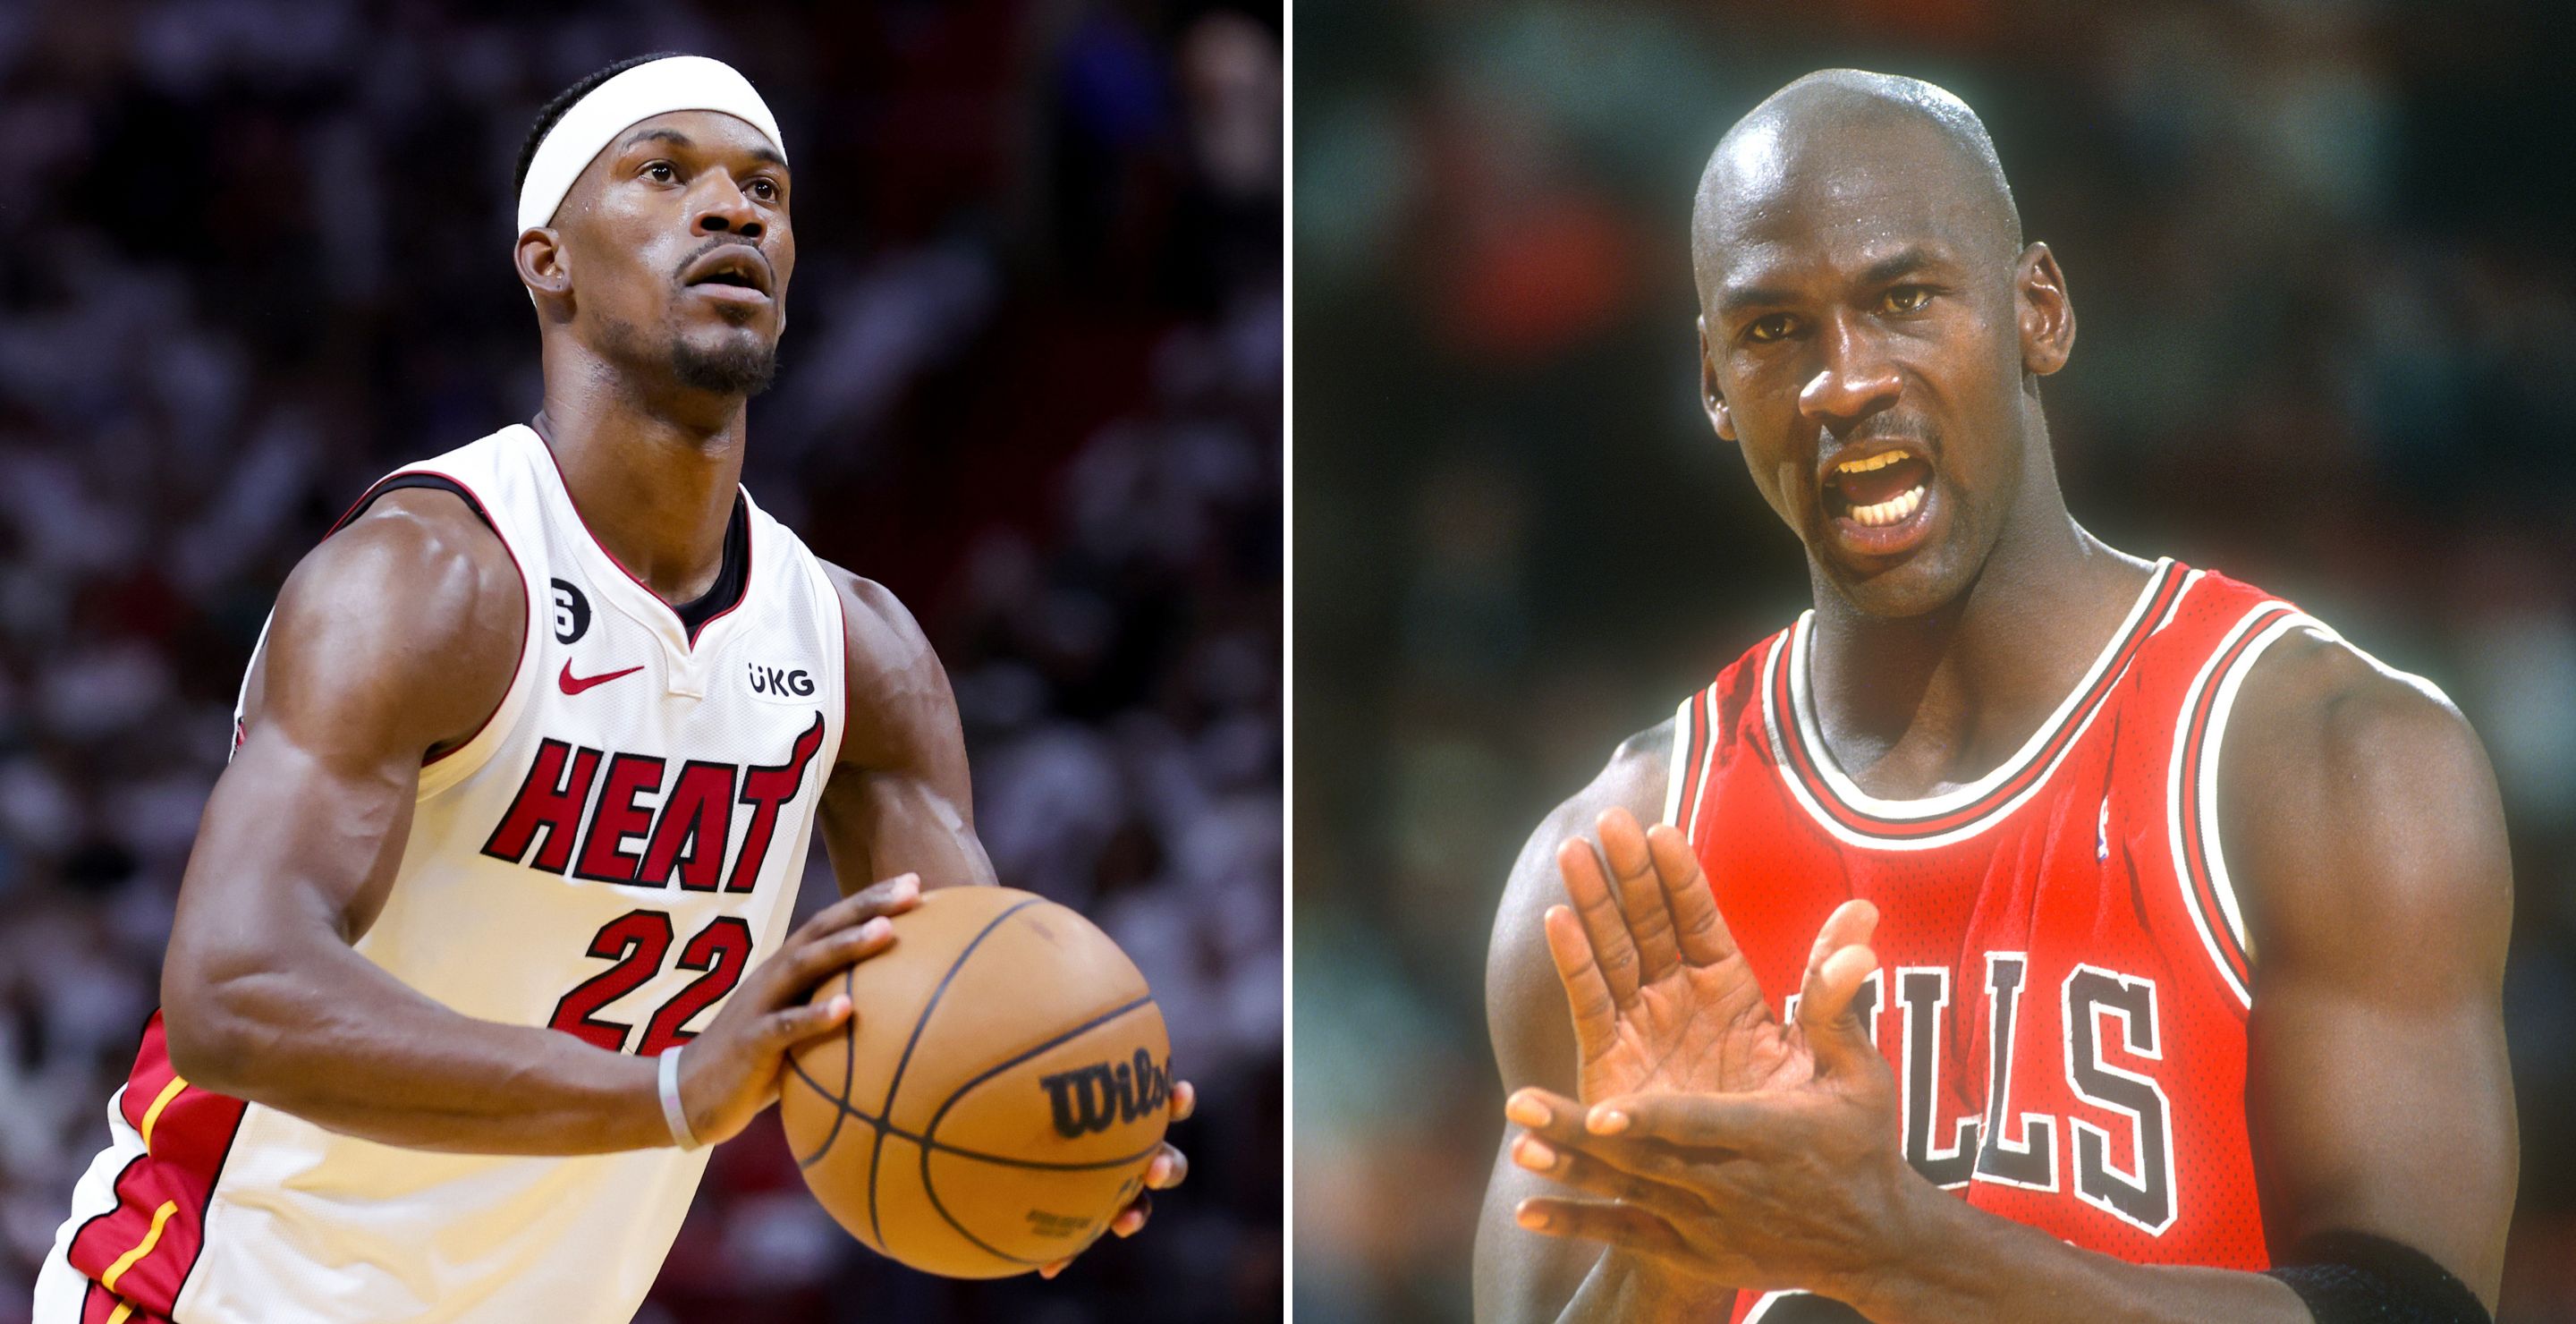 Jimmy Butler says Michael Jordan's No. 23 almost his with Heat